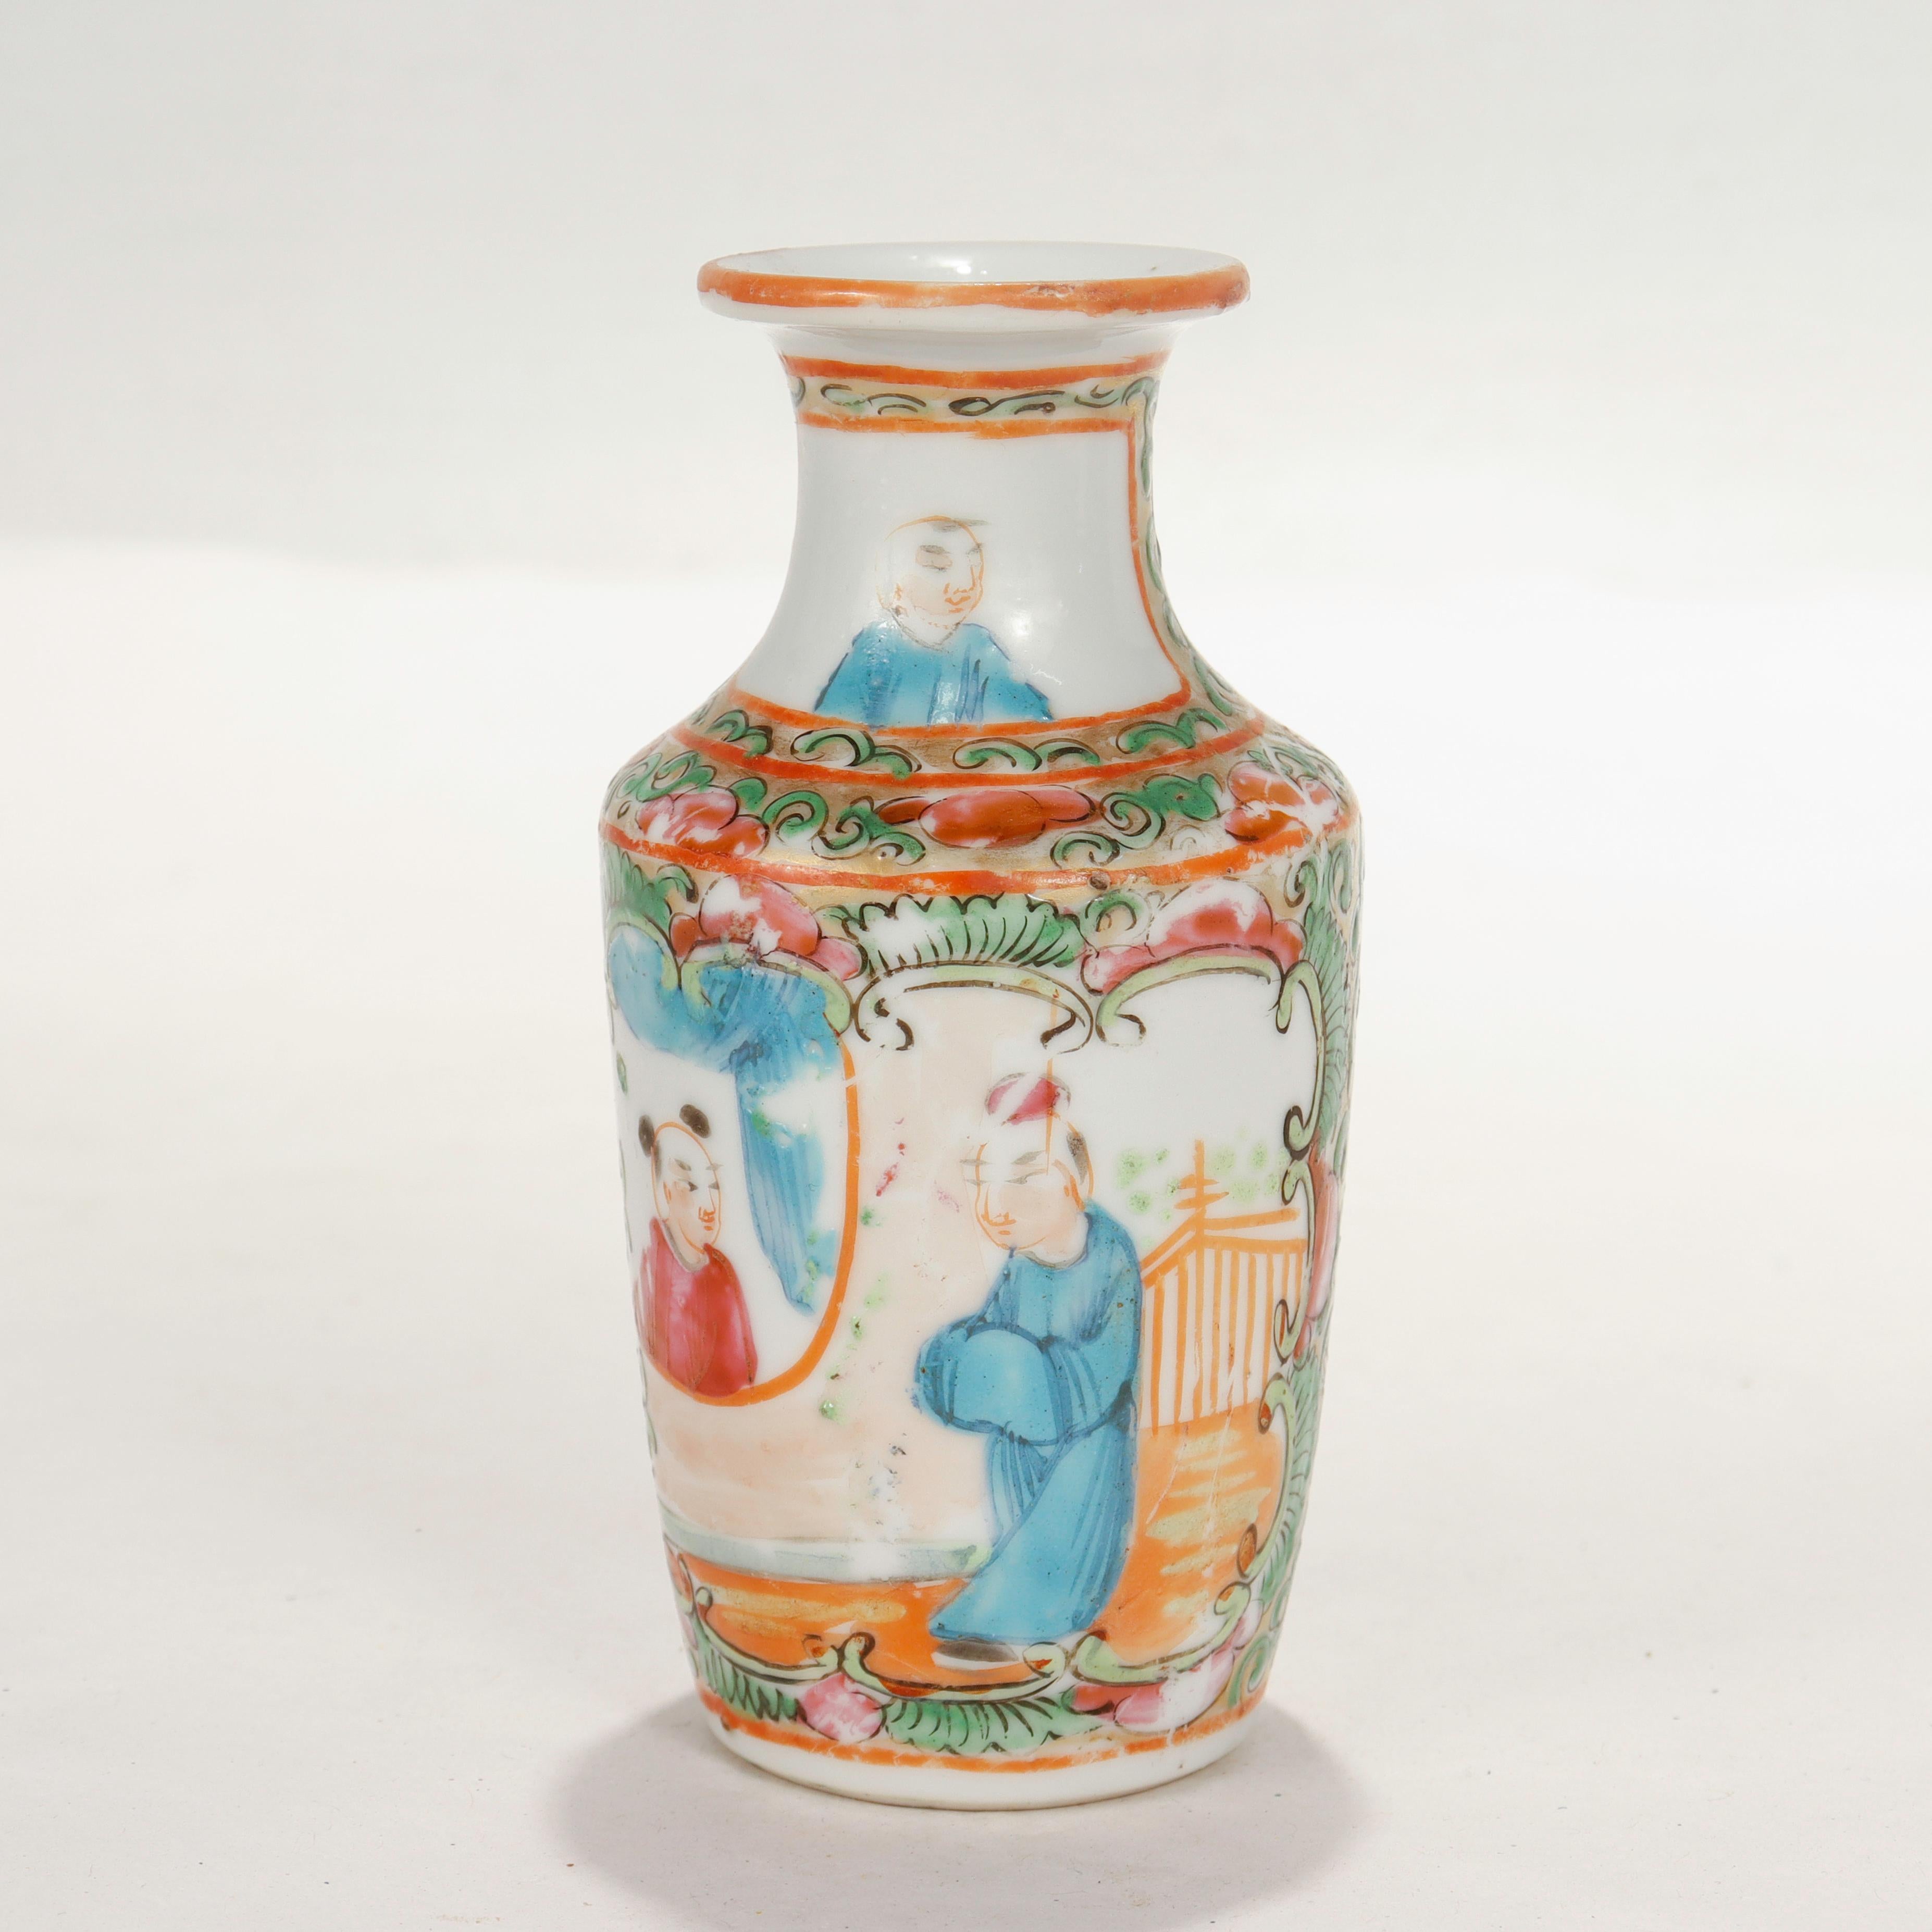 A fine antique Chinese porcelain vase.

With a baluster form.

In the Rose Medallion style.

Simply a wonderful Chinese Export Rose Medallion porcelain vase!

Date:
Late 19th or Early 20th Century

Overall Condition:
It is in overall